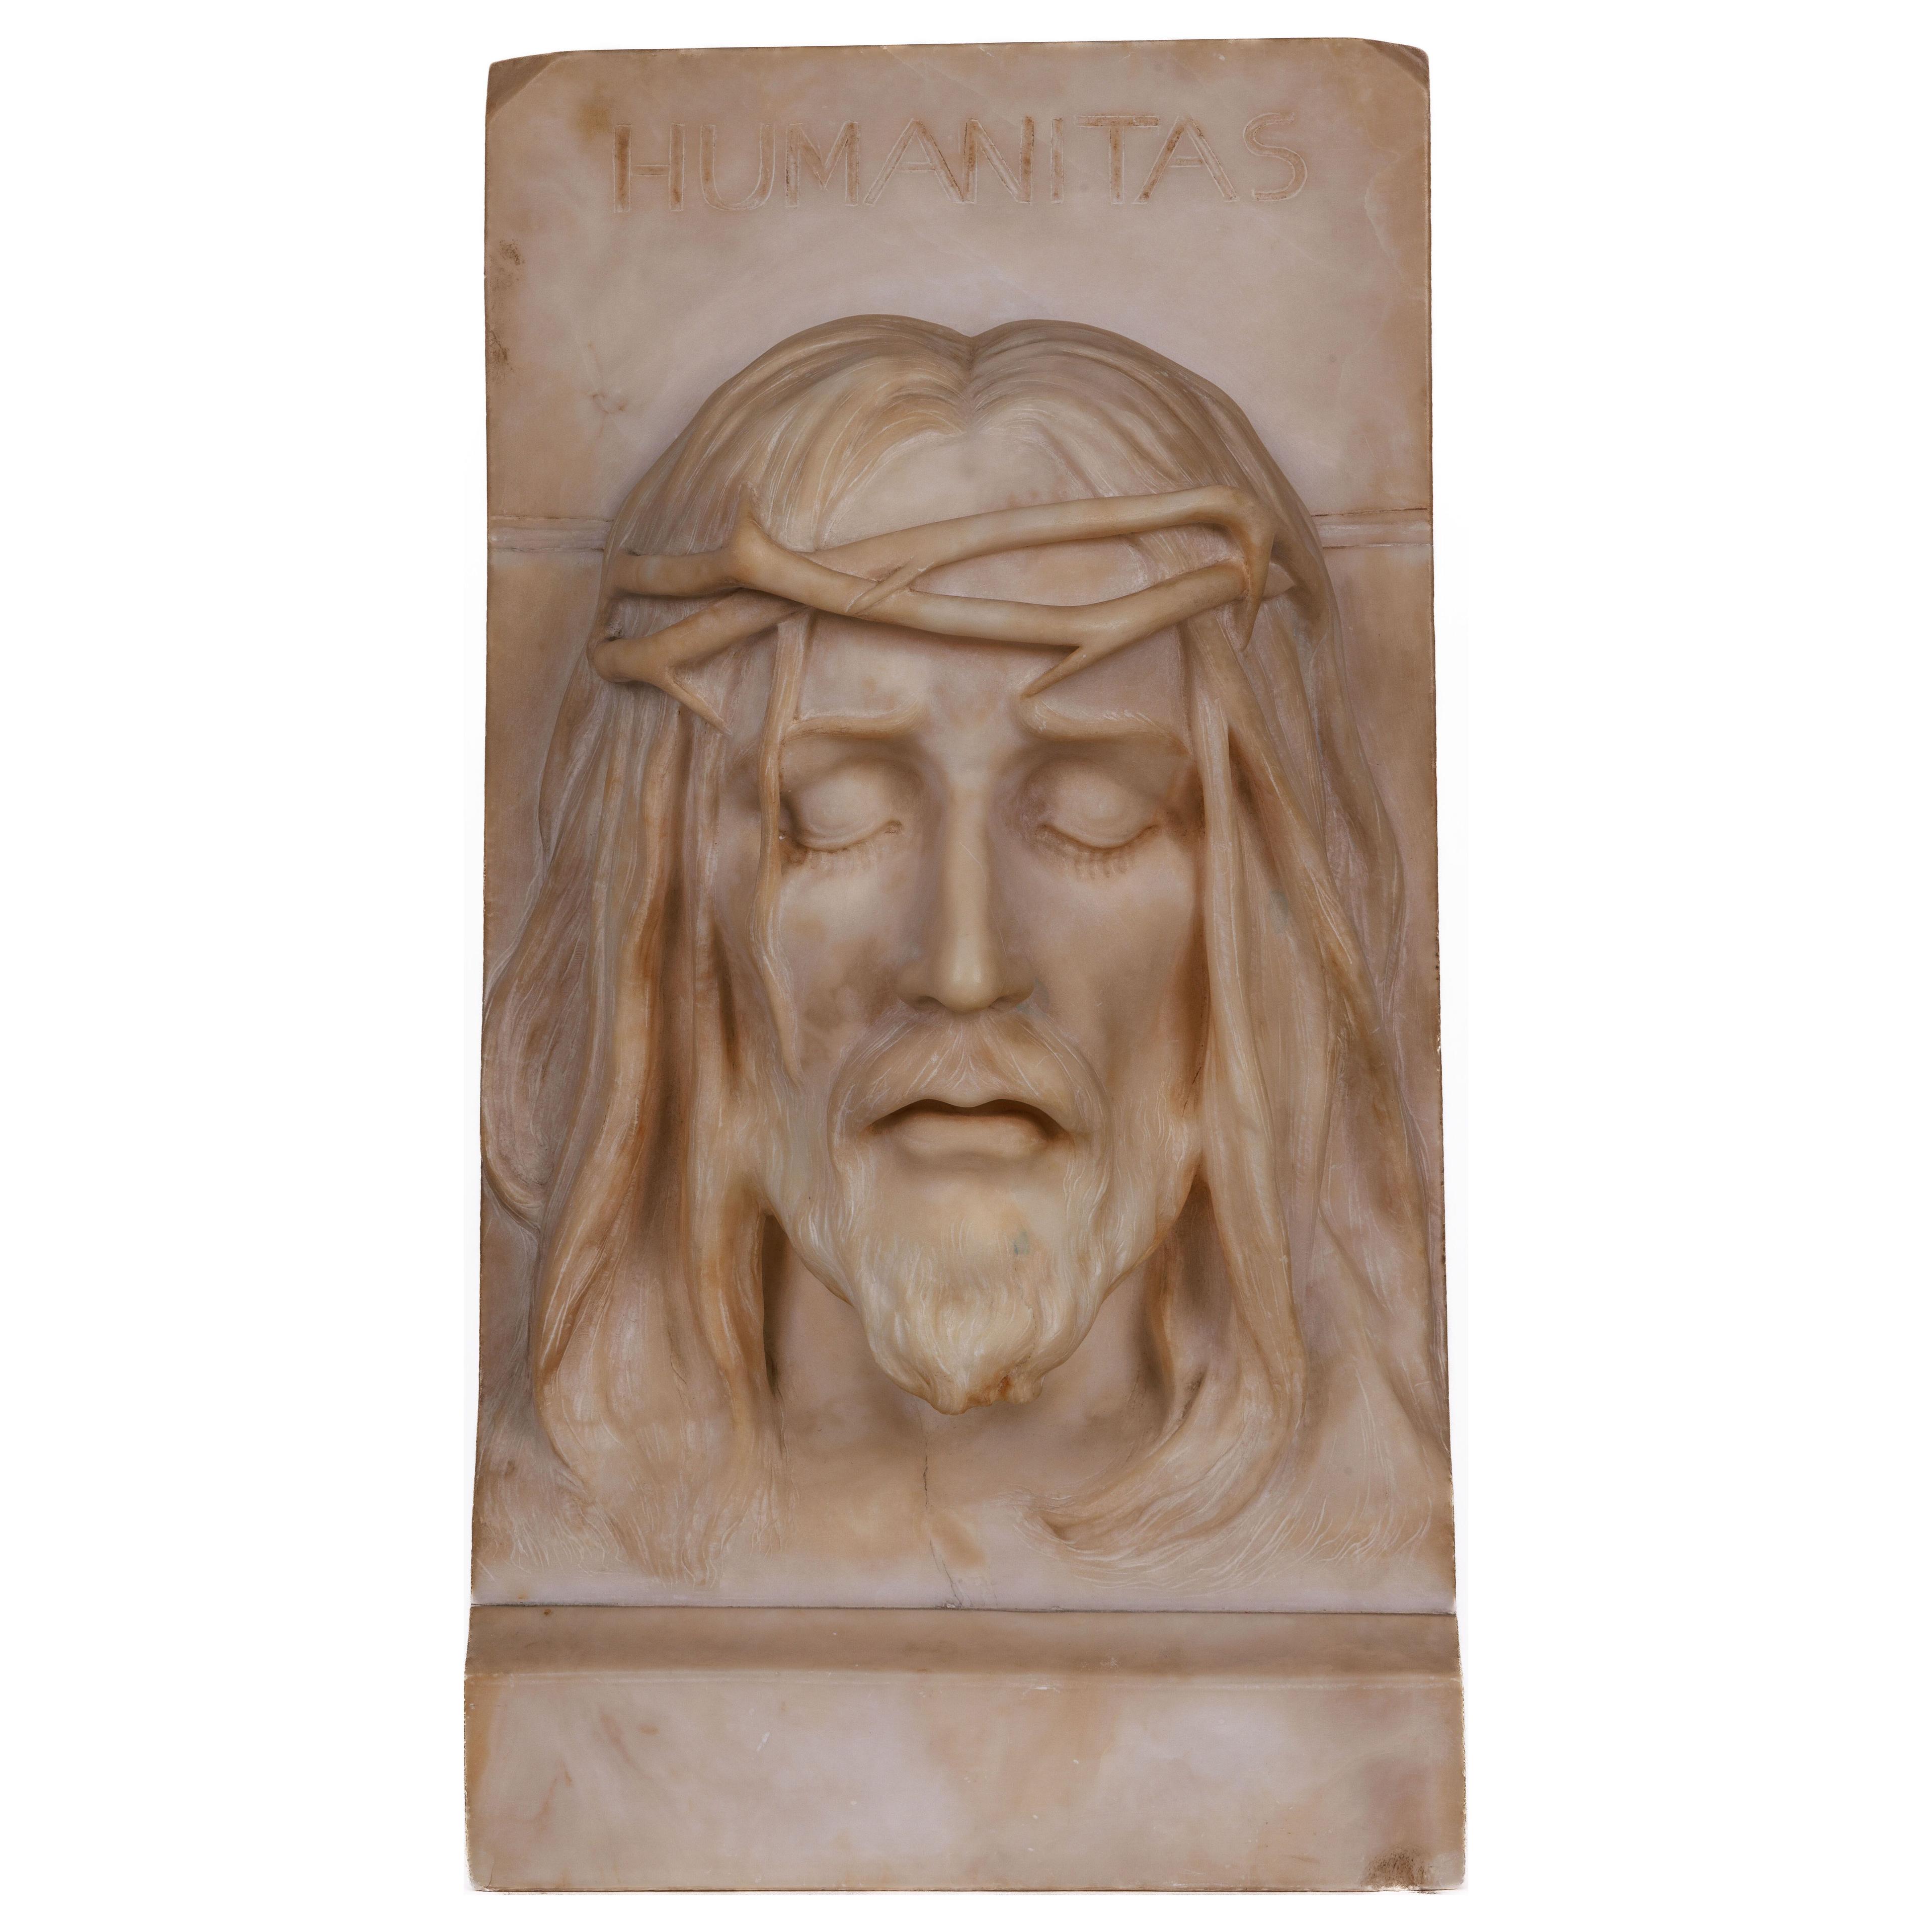 Rare and Important Italian Alabaster Bust Sculpture of Jesus Christ, C. 1860